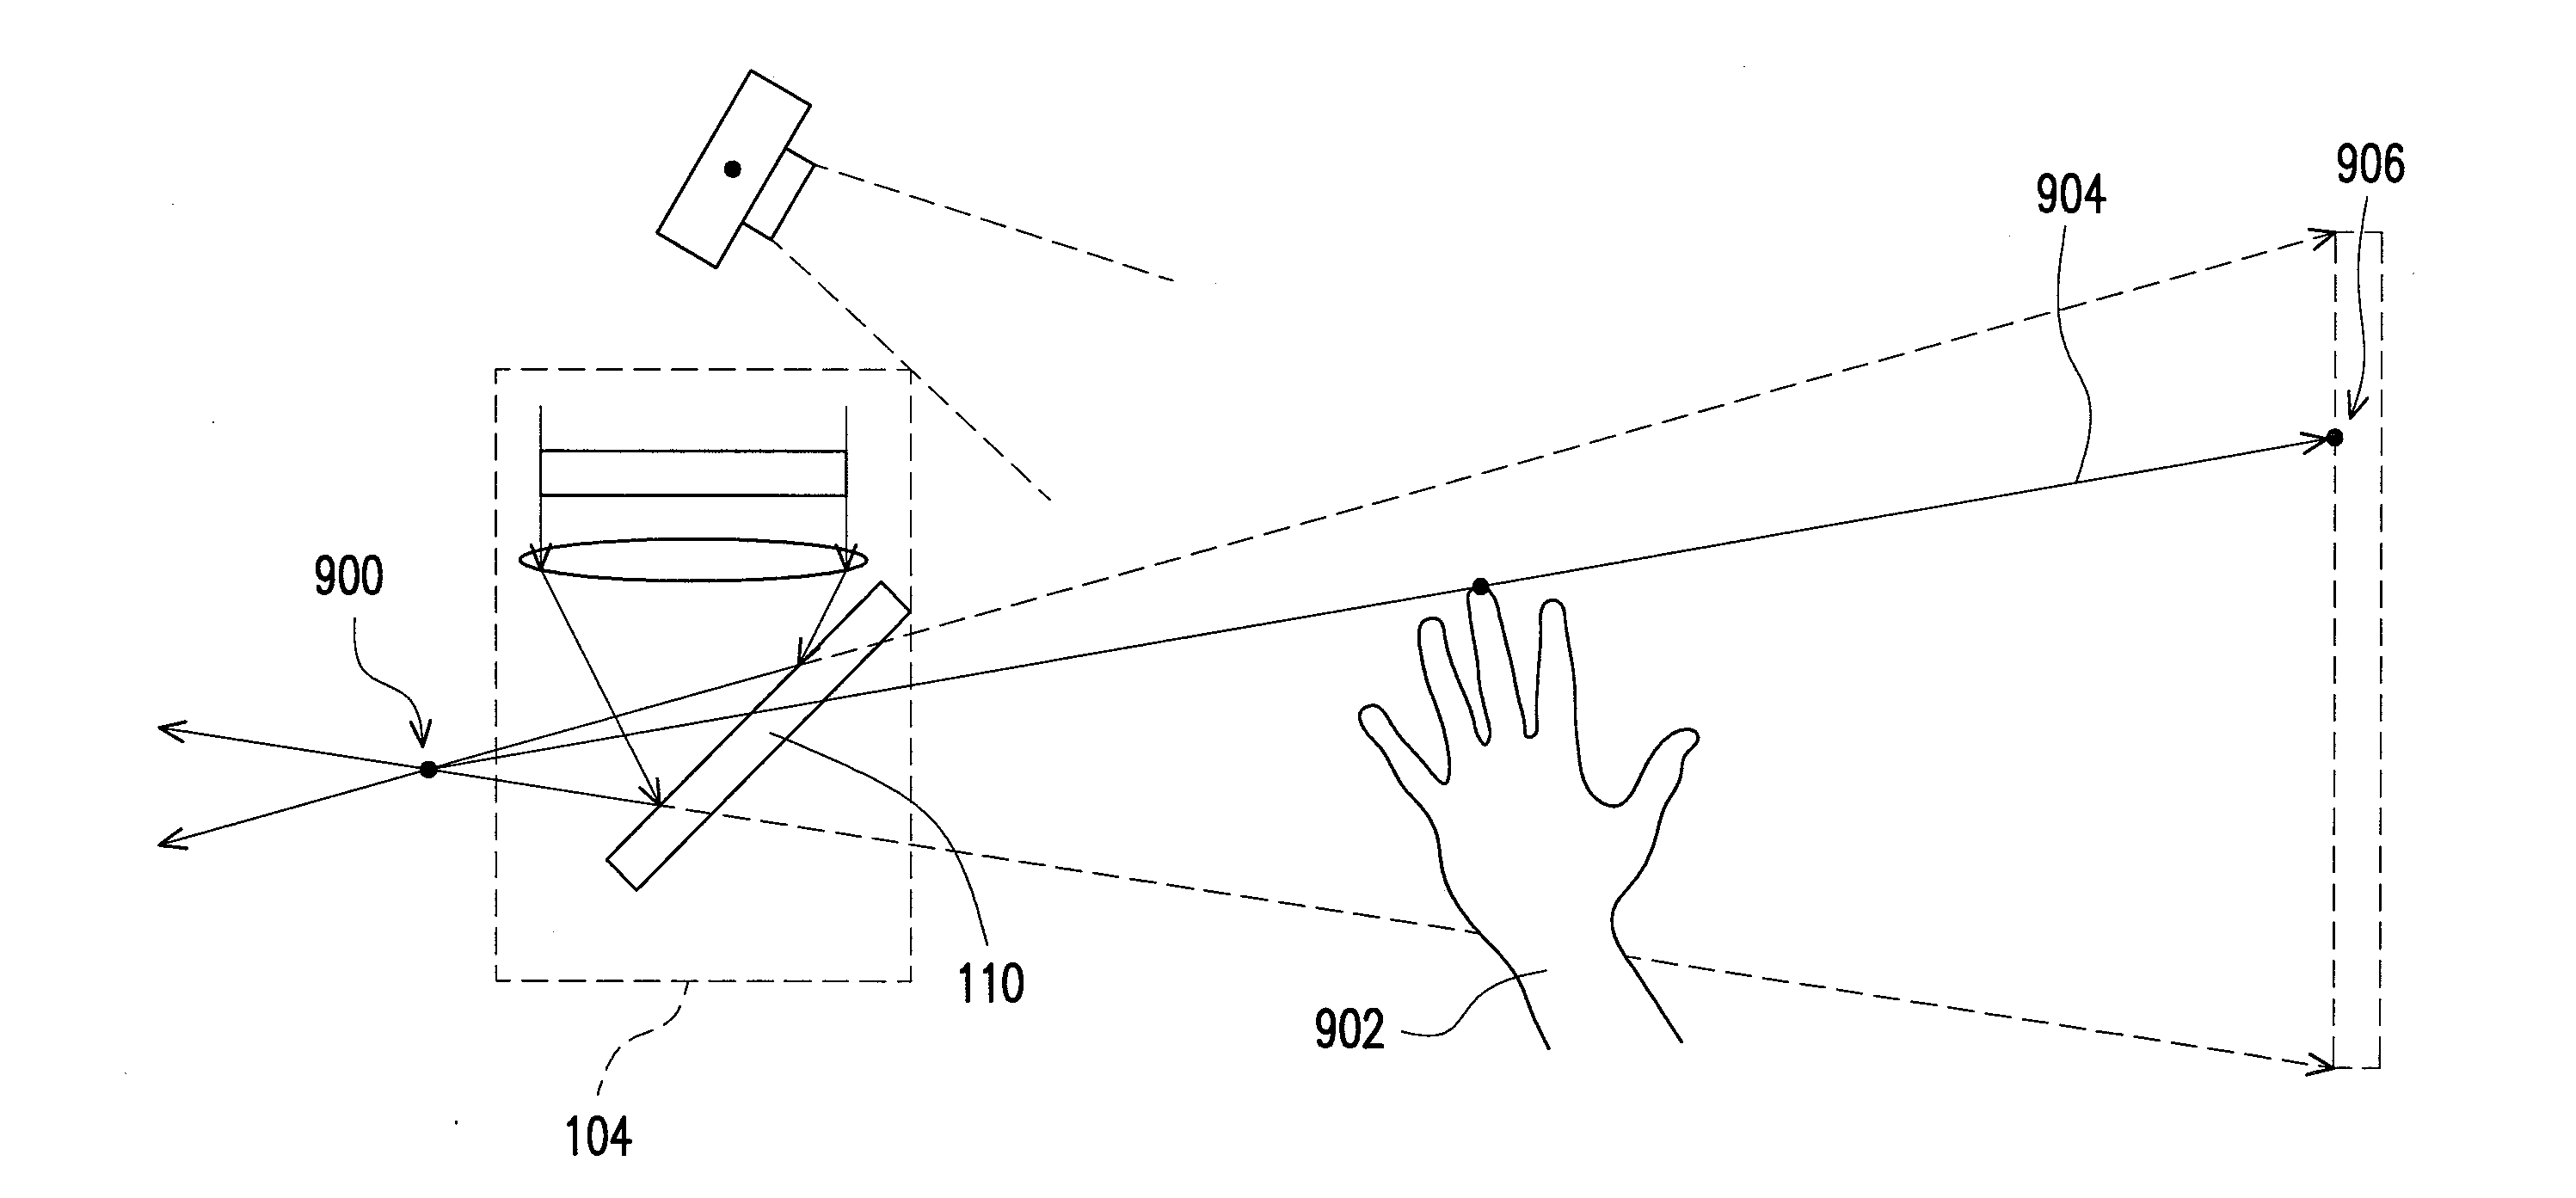 Optical-see-through head mounted display system and interactive operation